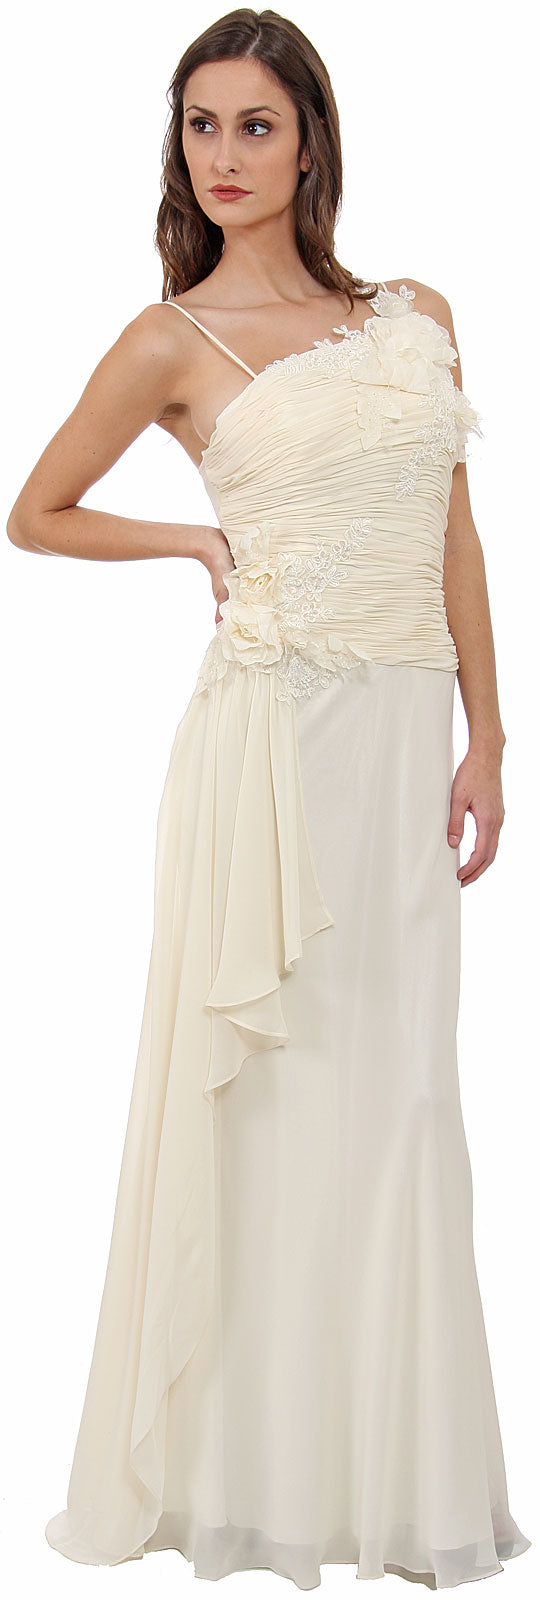 Main image of Asymmetric Top Floral And Sheered Wedding Dress